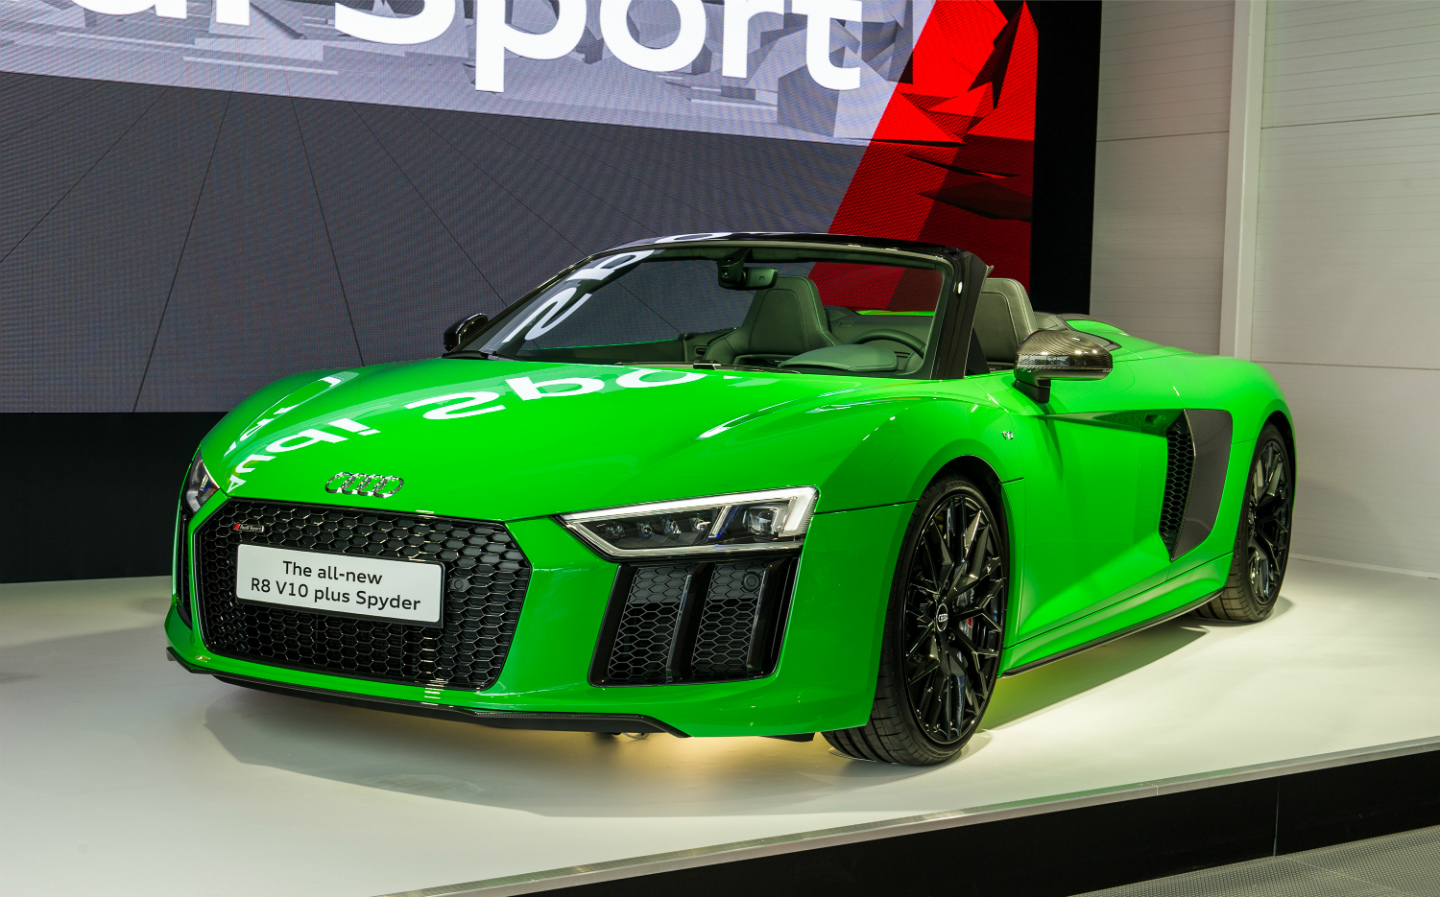 Audi R8 V10 Plus Spyder: Top 5 star new cars at the 2017 Goodwood Festival of Speed